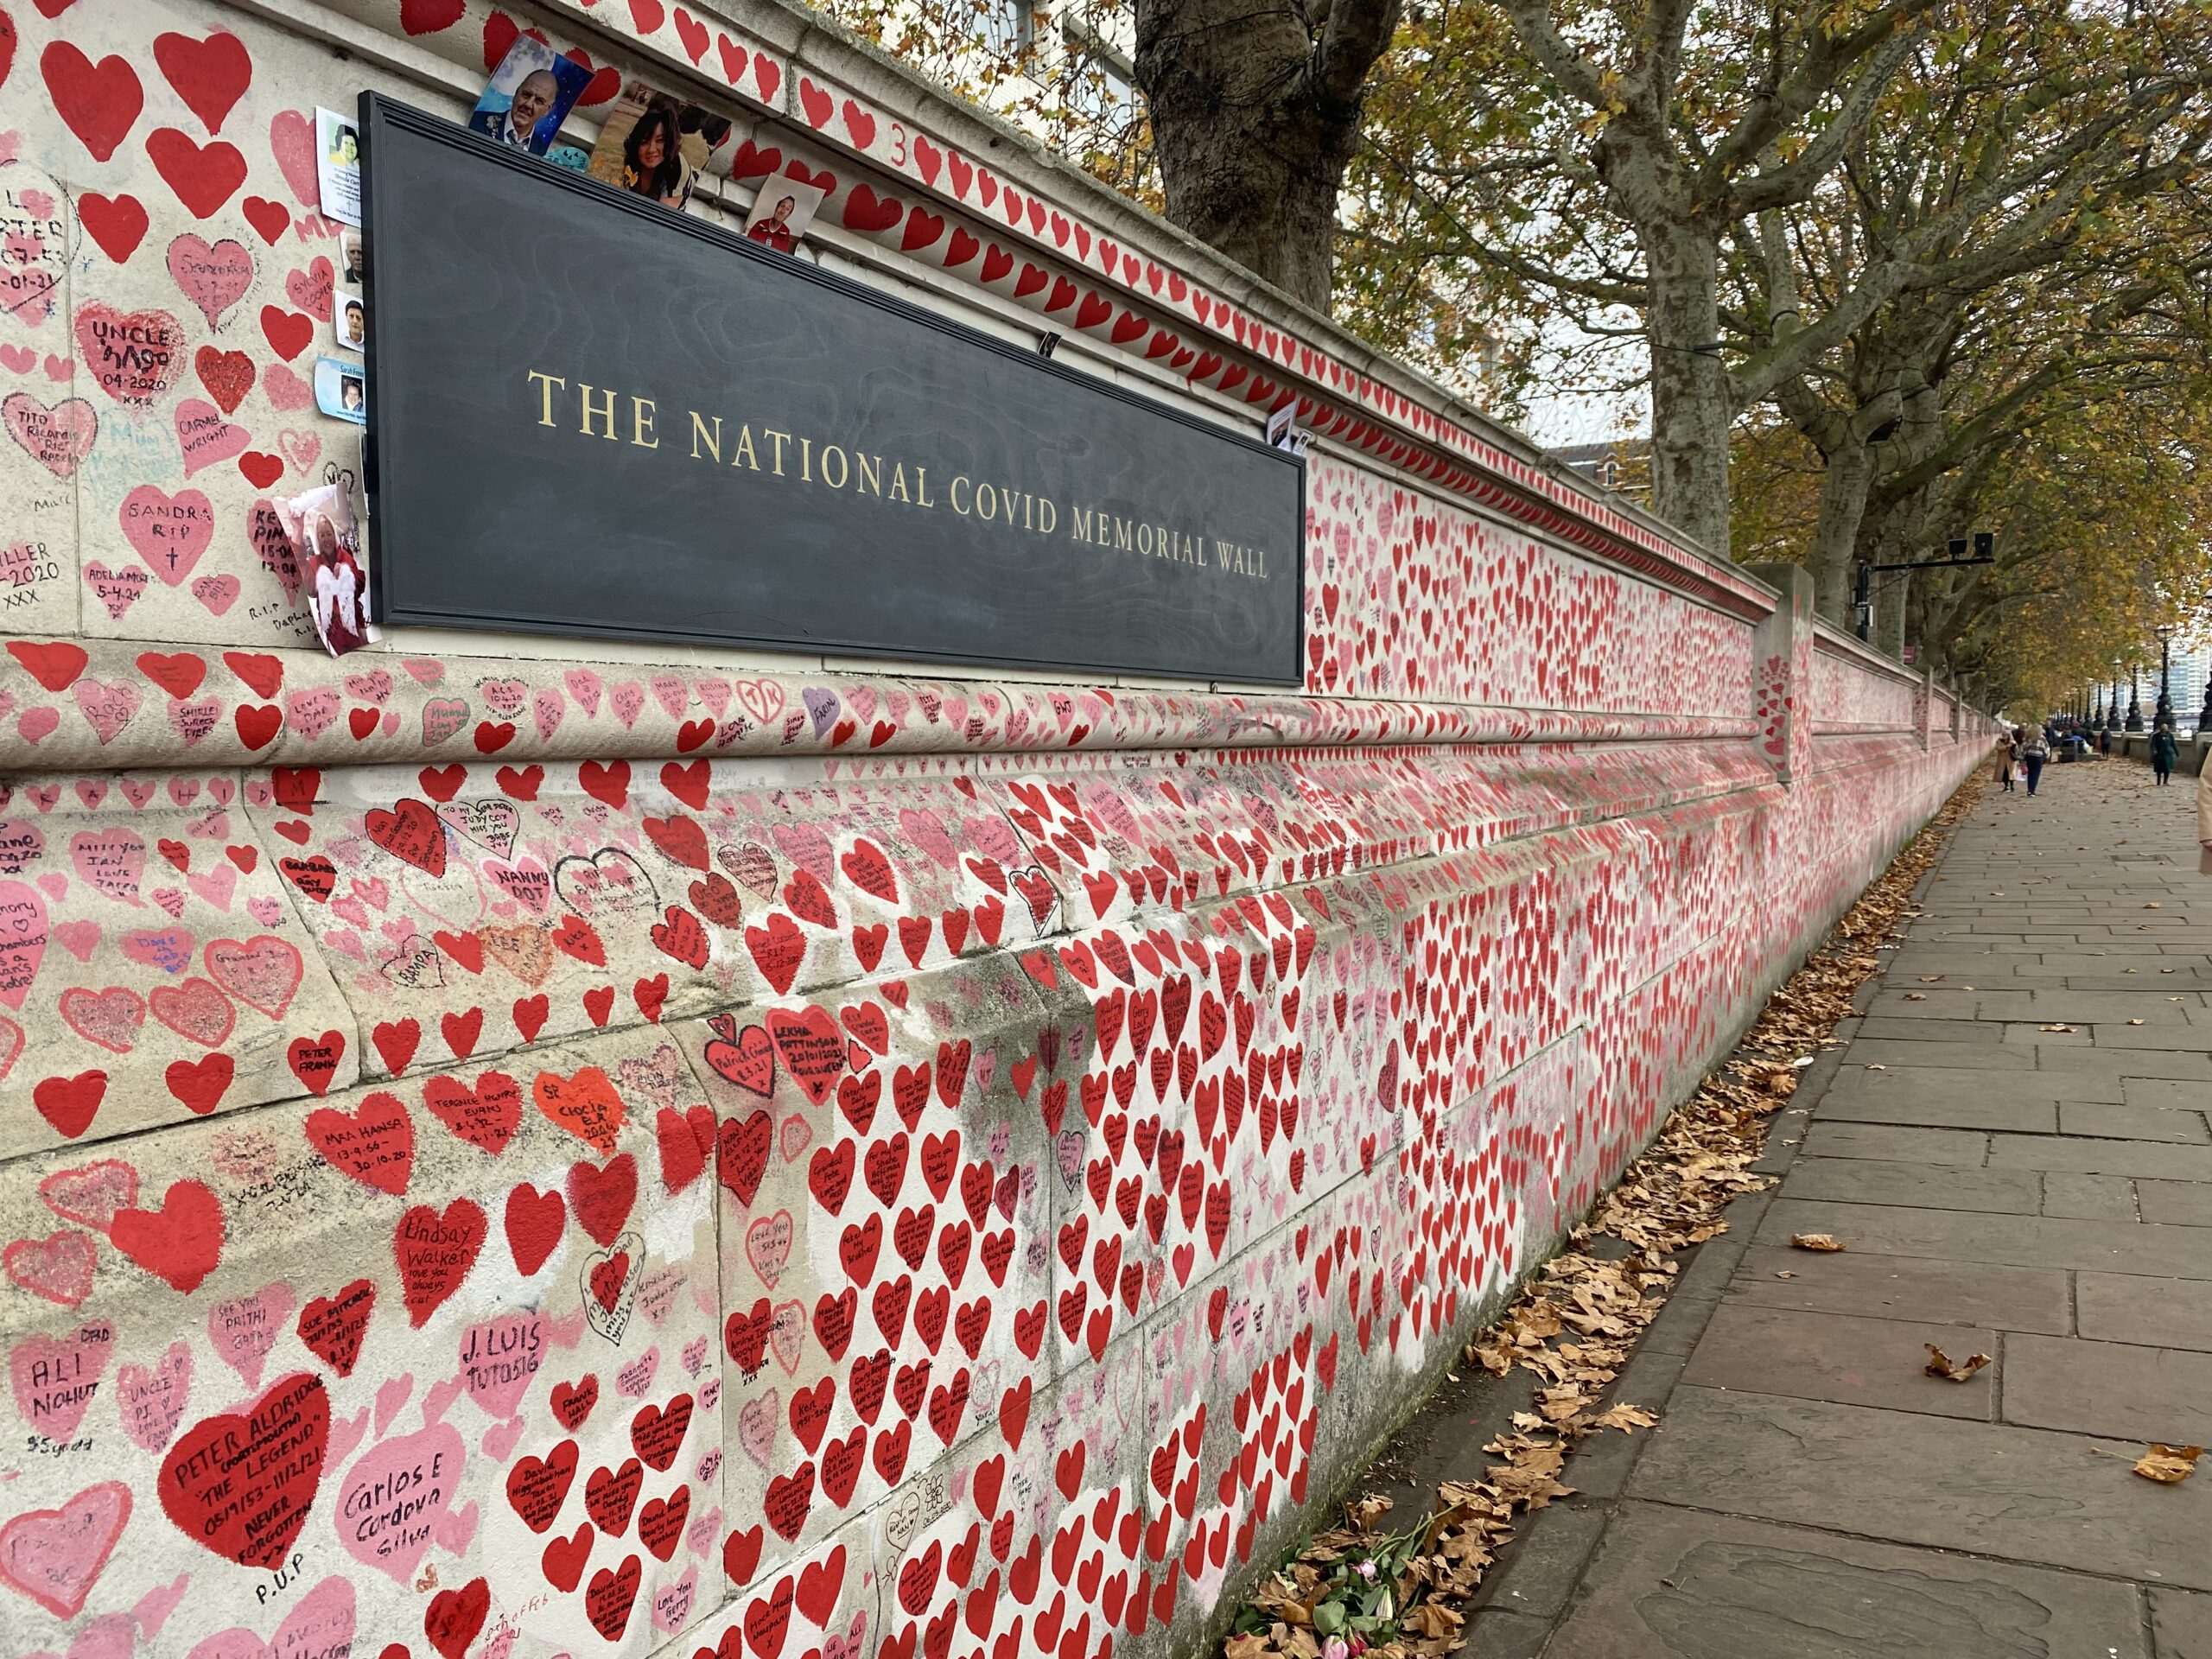 Photo of the COVID-19 Memorial Wall. it is covered by red and pink hearts along with the names of deceased loved ones